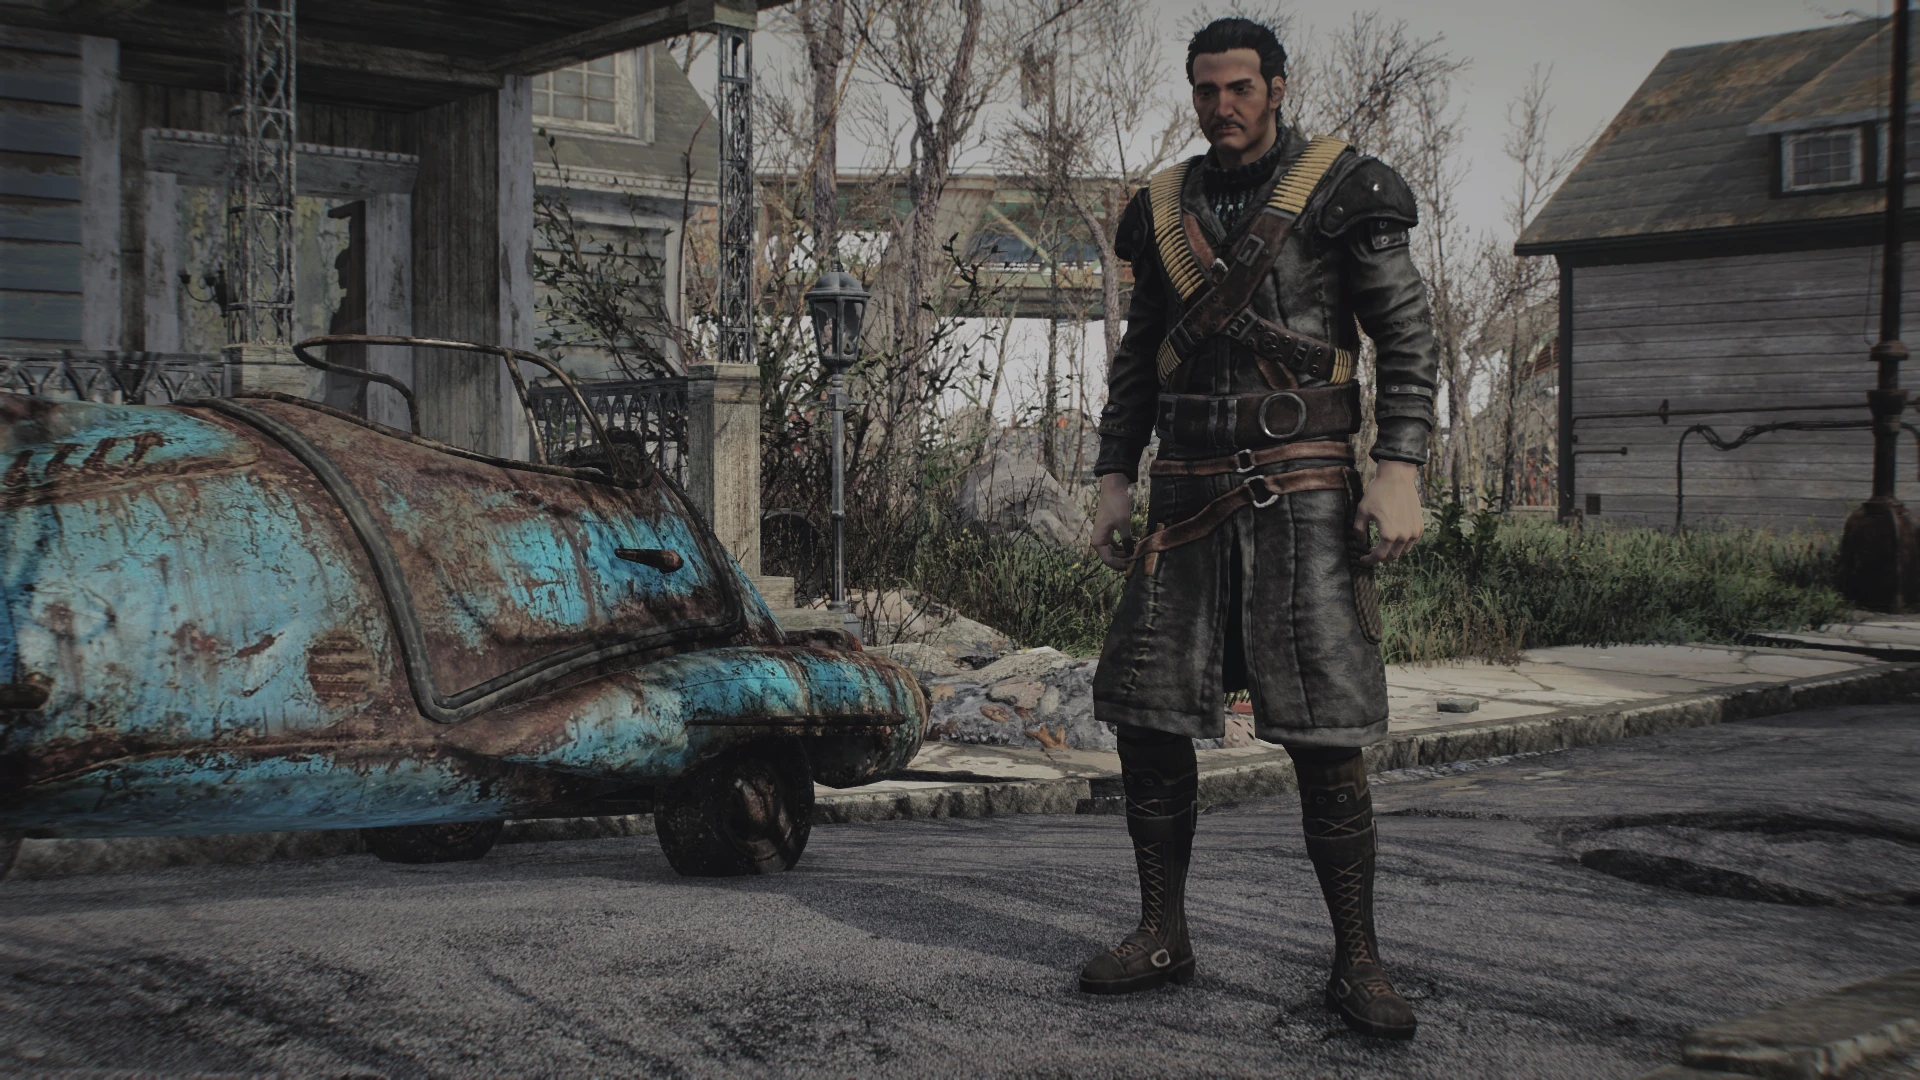 All clothing fallout 4 фото 68